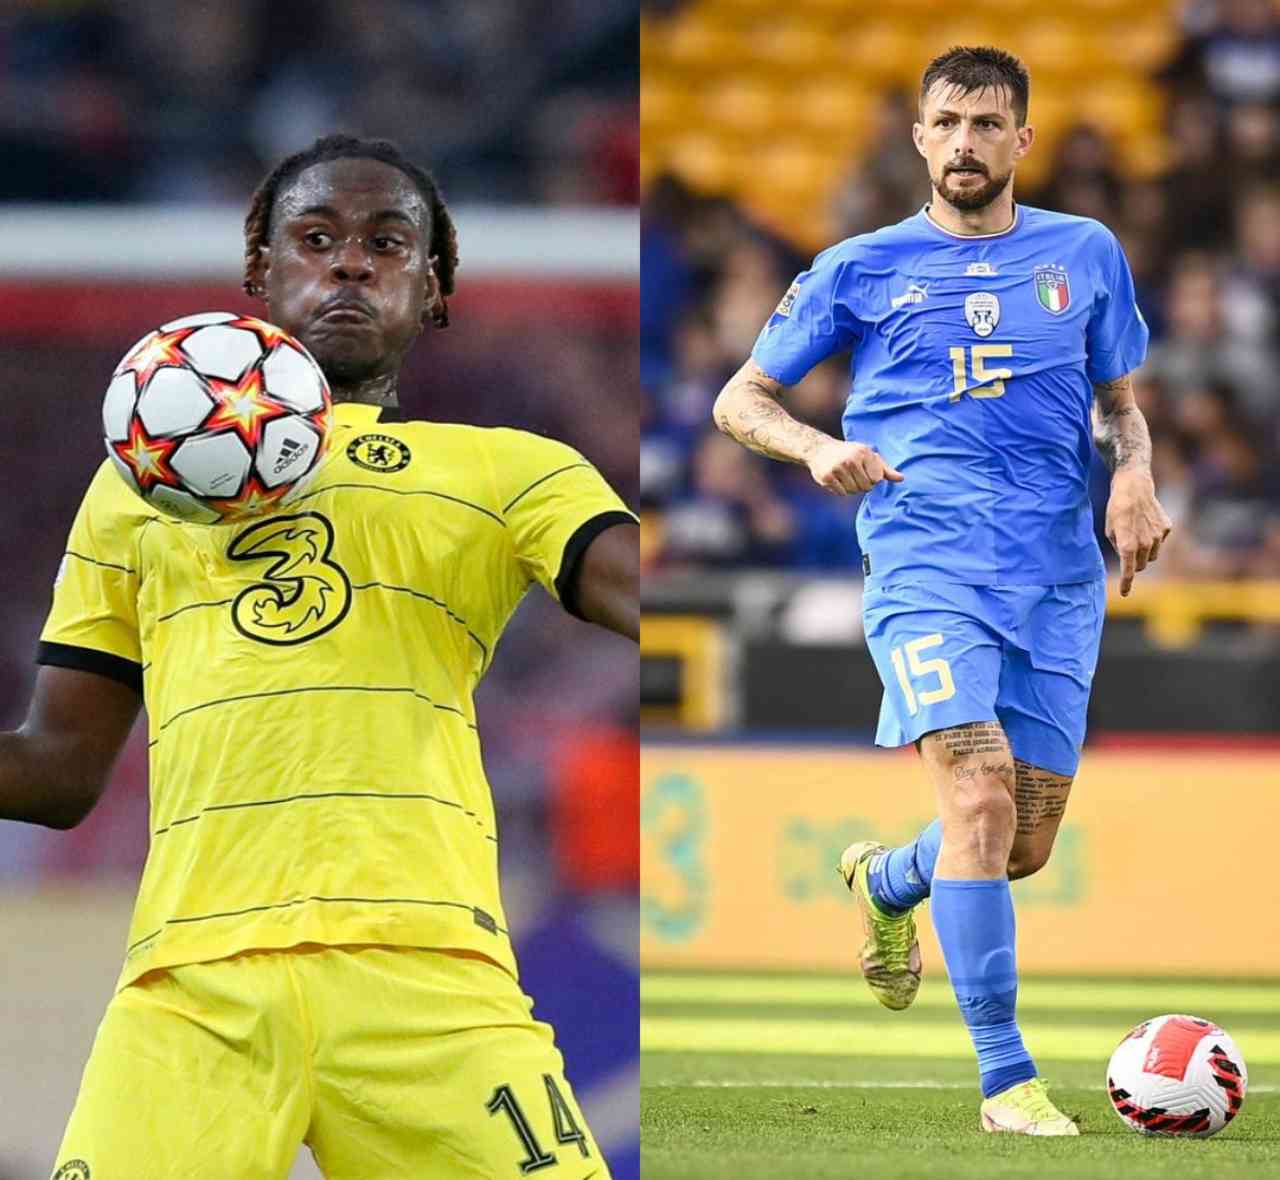 No Chelsea a Chalobah, Acerbi in direzione Inter